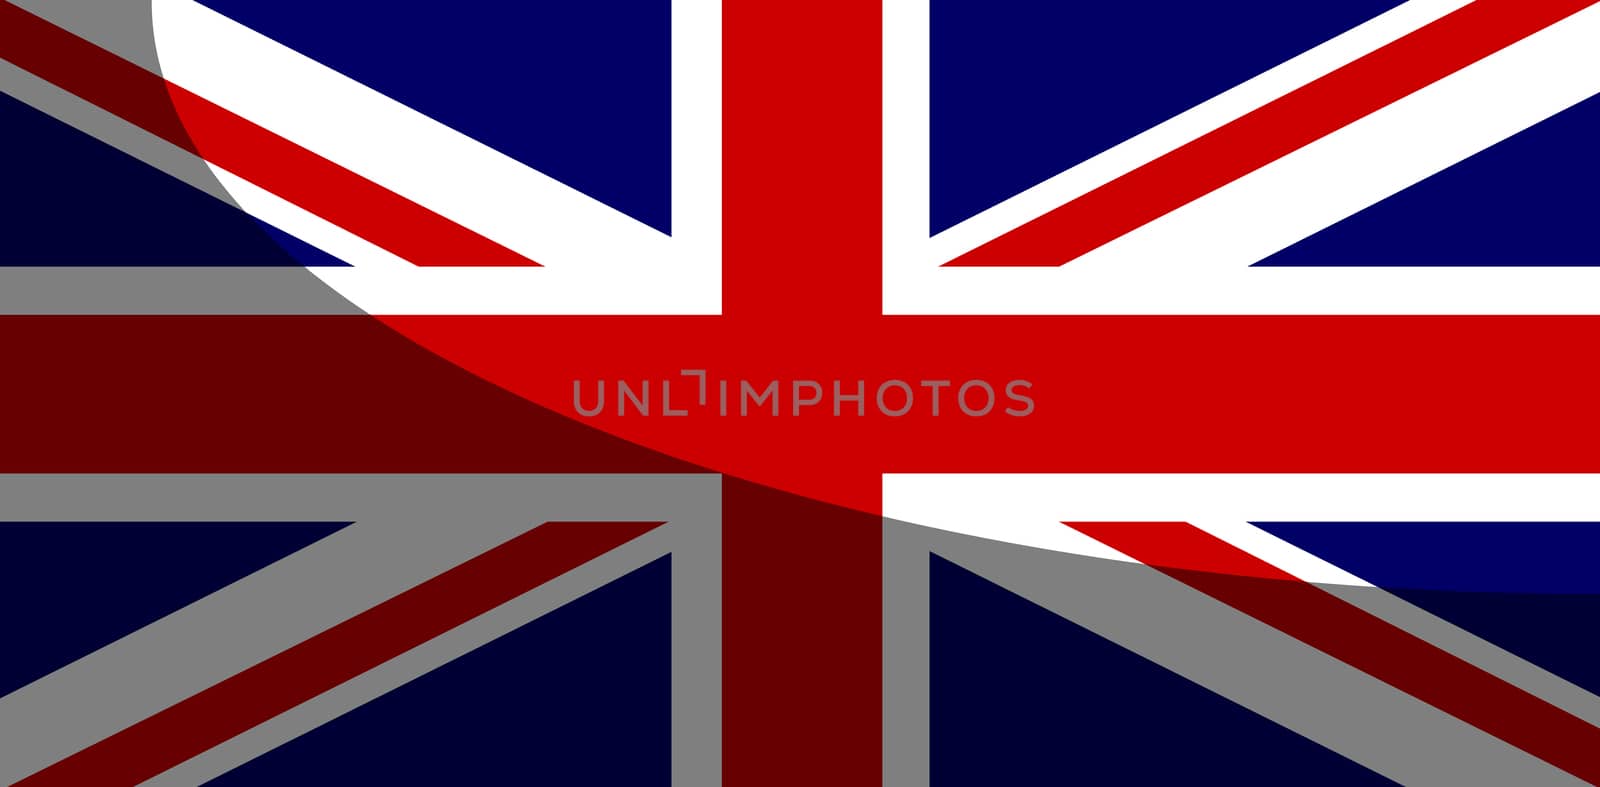 The UK Union Jack flag with a heavy shadow